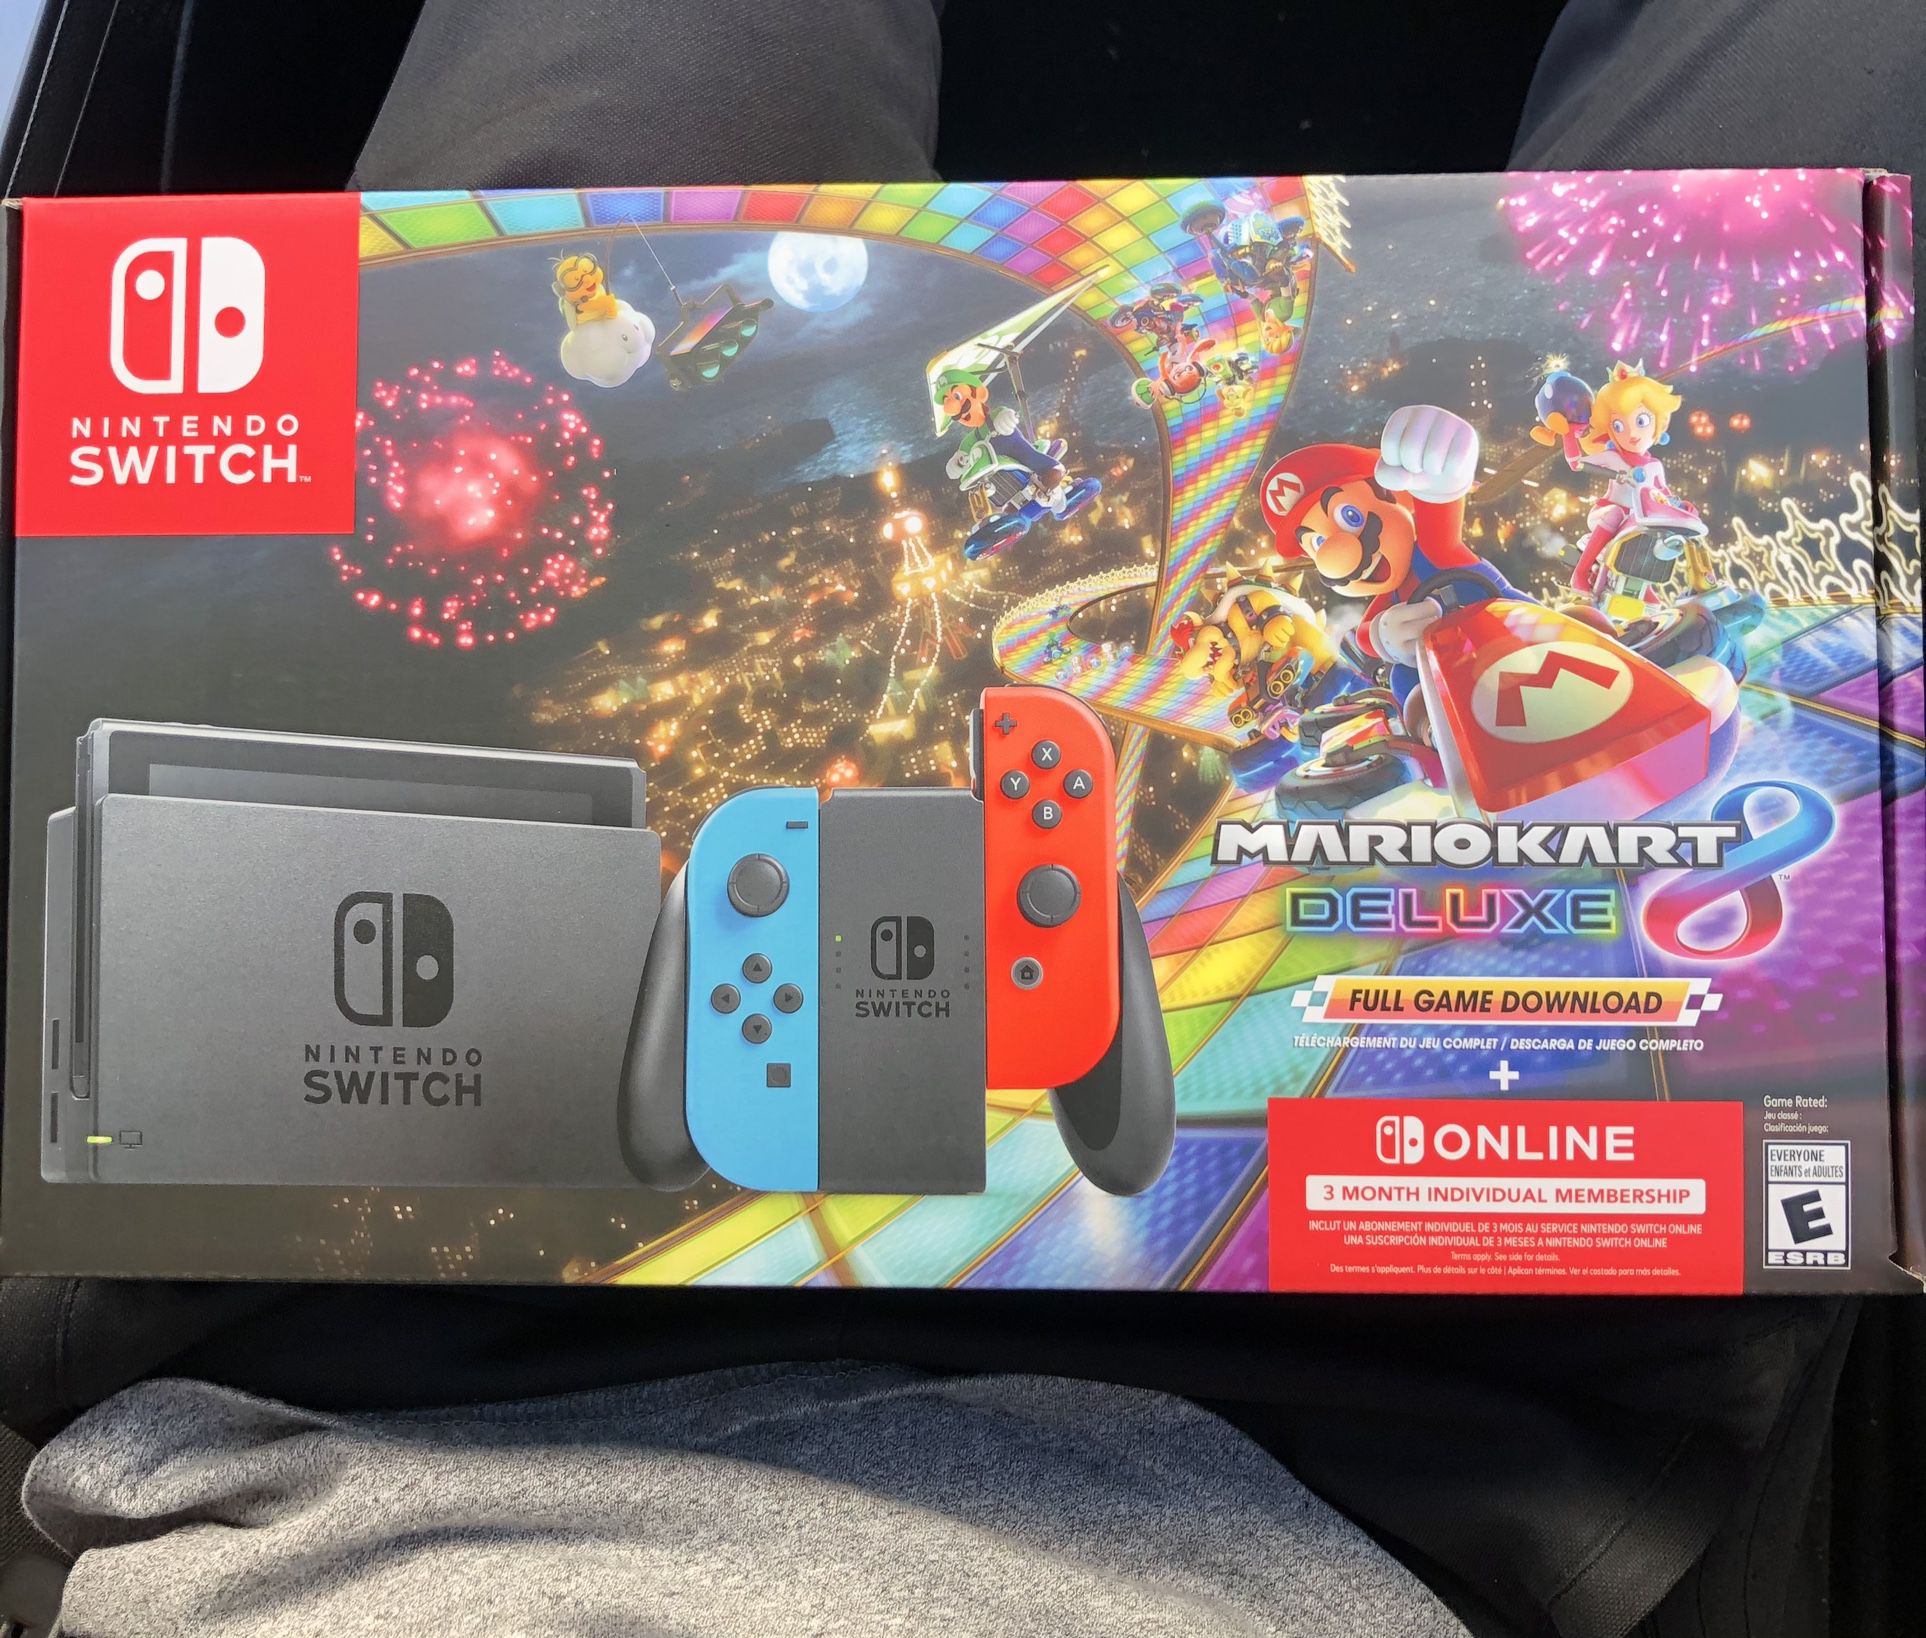 Nintendo Switch Console + Mario Kart 8 Deluxe (Download) + 1 Month Individual Membership